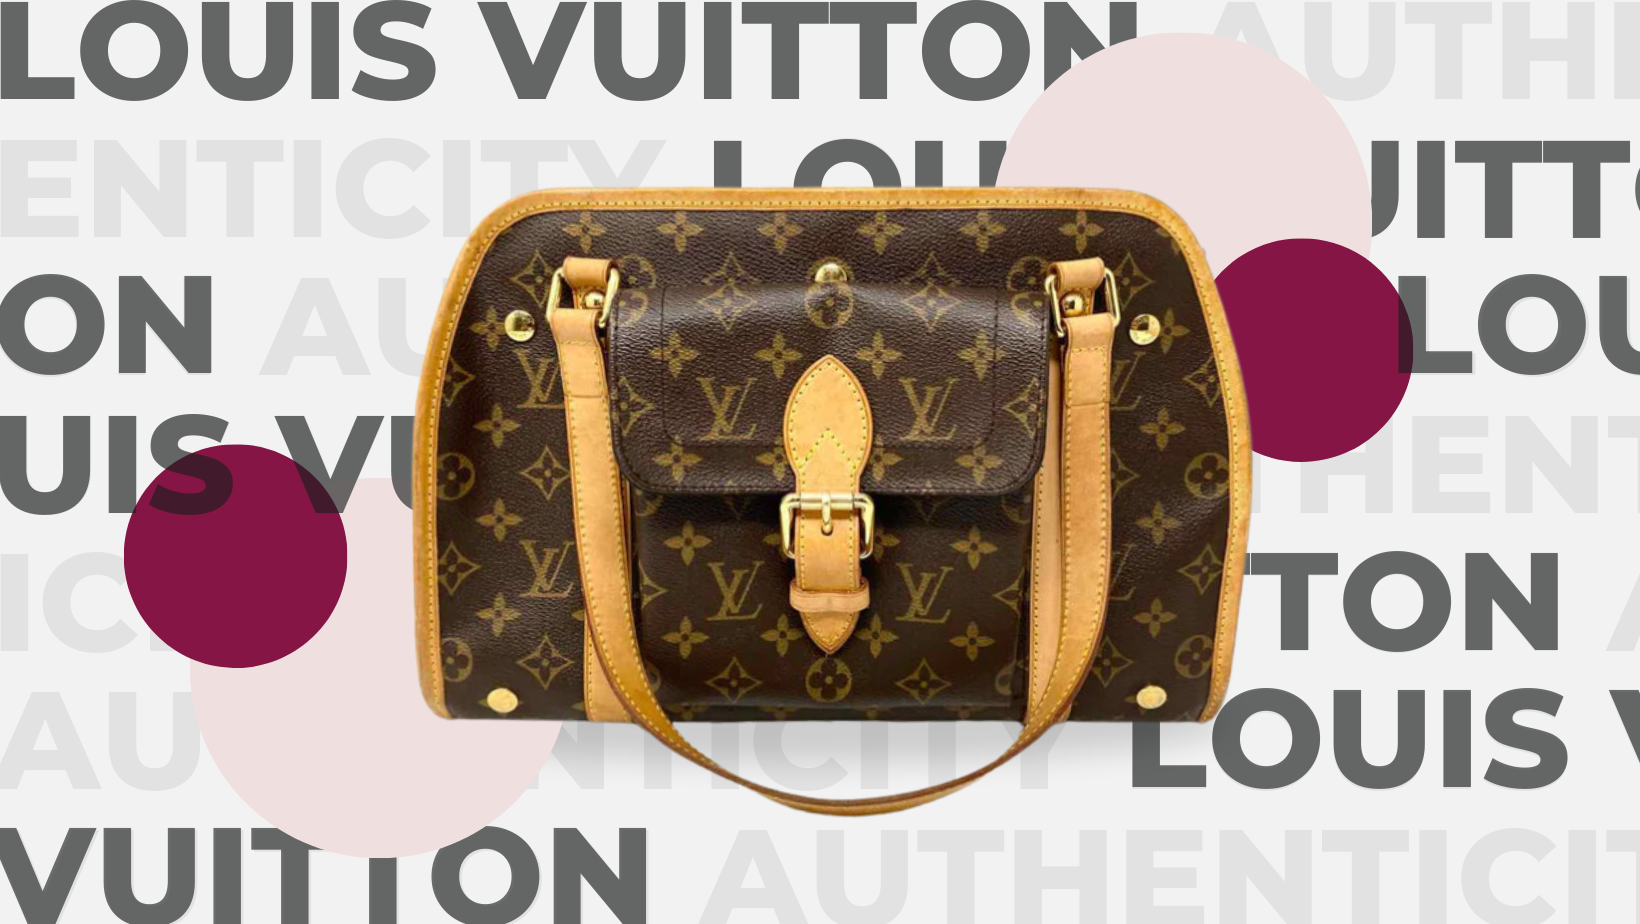 How to Tell if Your Louis Vuitton is Authentic